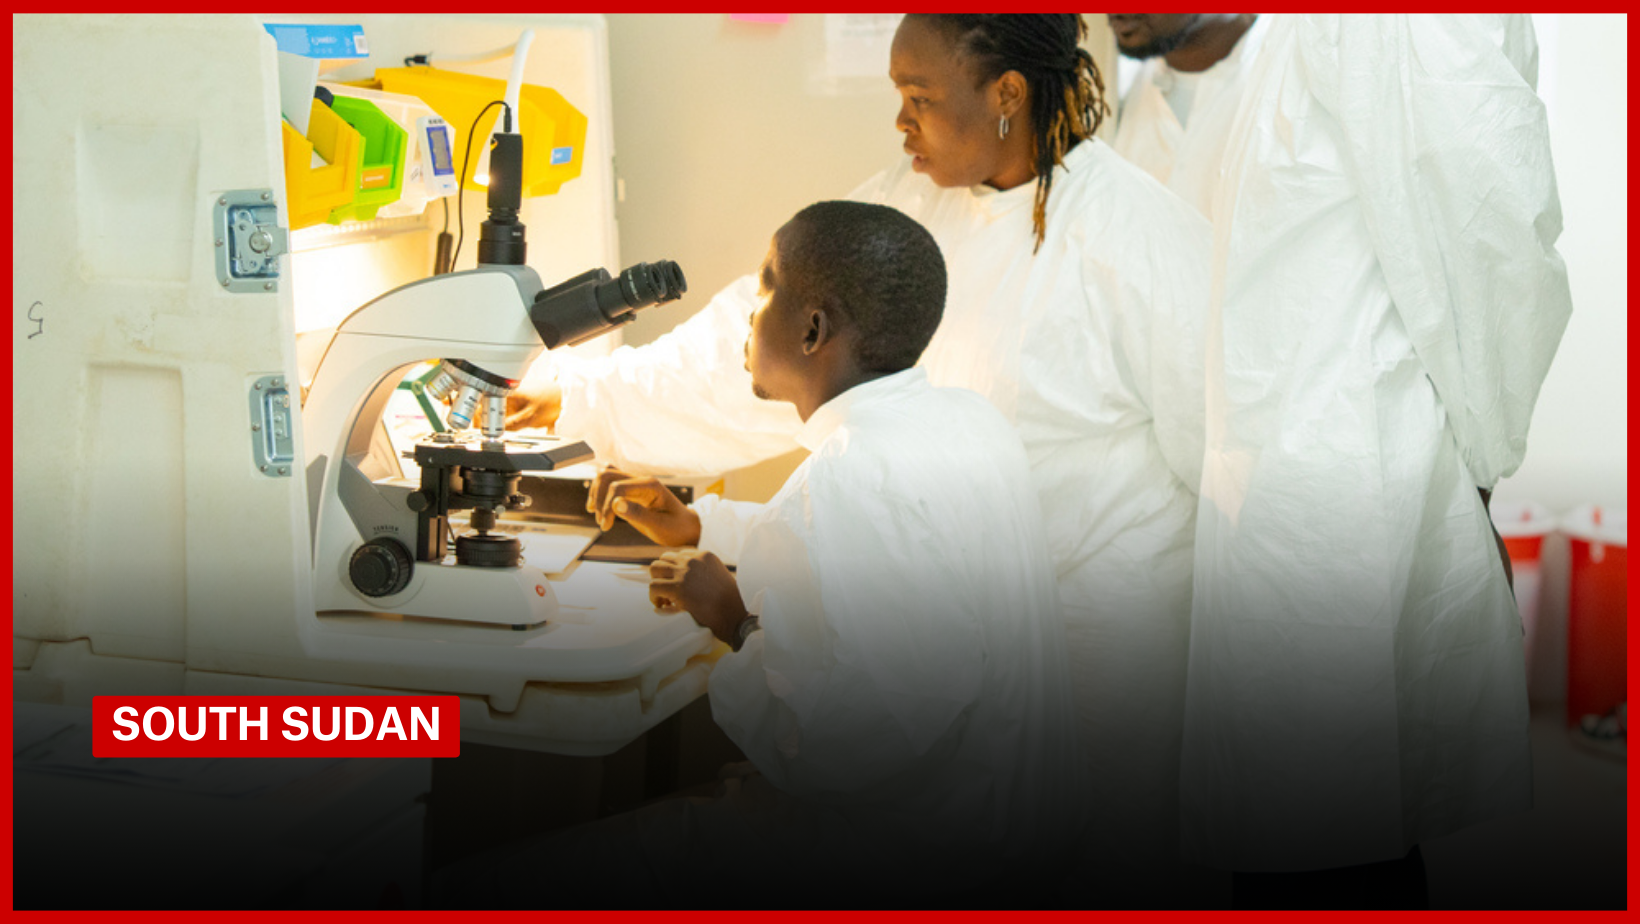 MSF Mini Lab initiative brings hope in fight against antimicrobial resistance in South Sudan